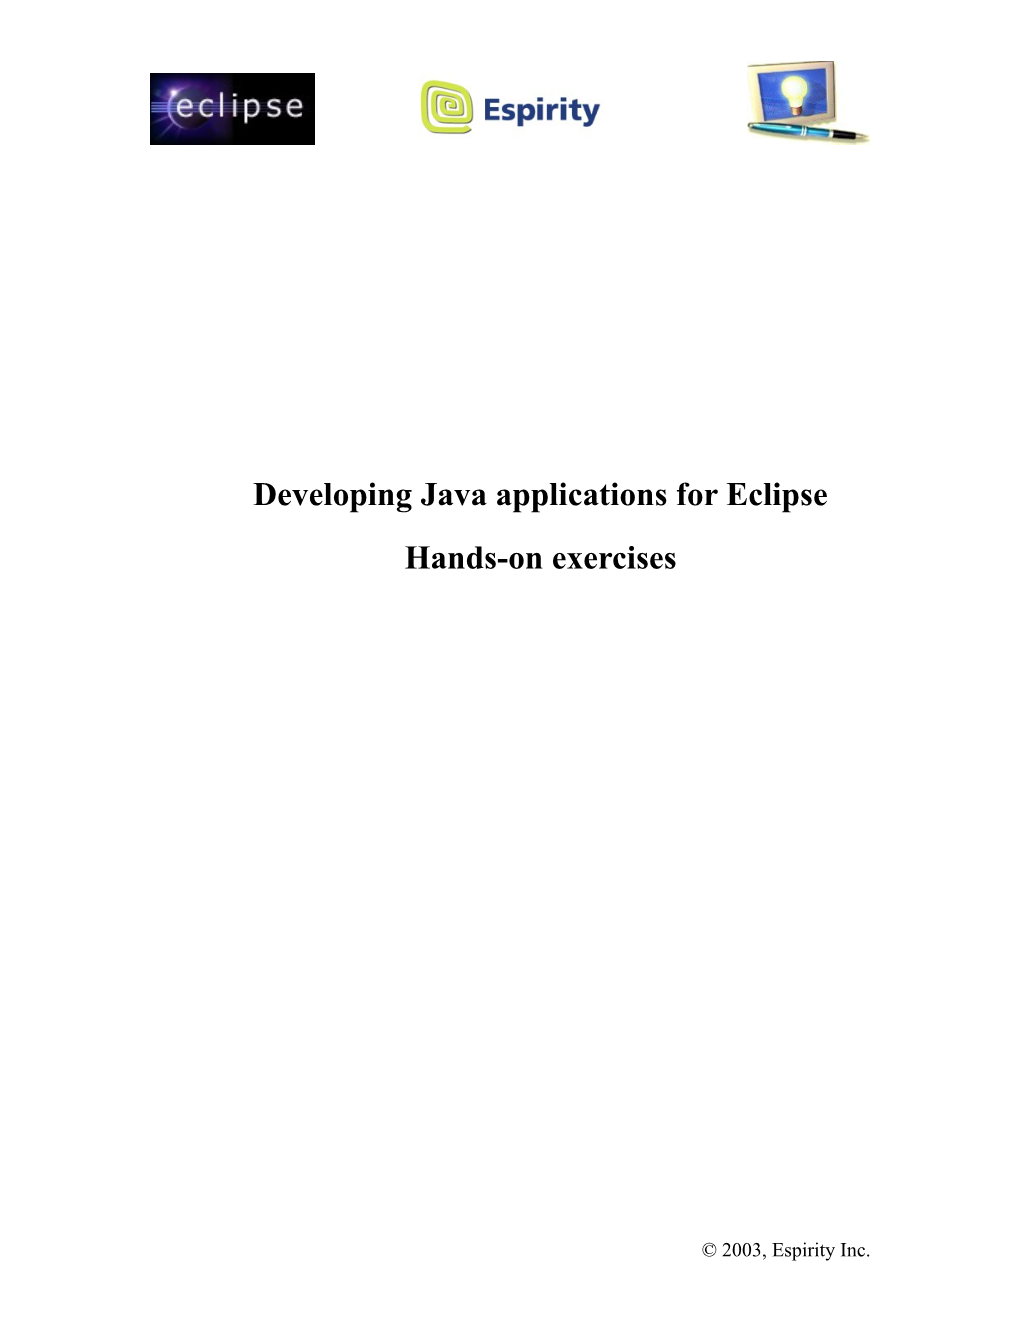 Developing Plug-Ins for Eclipse